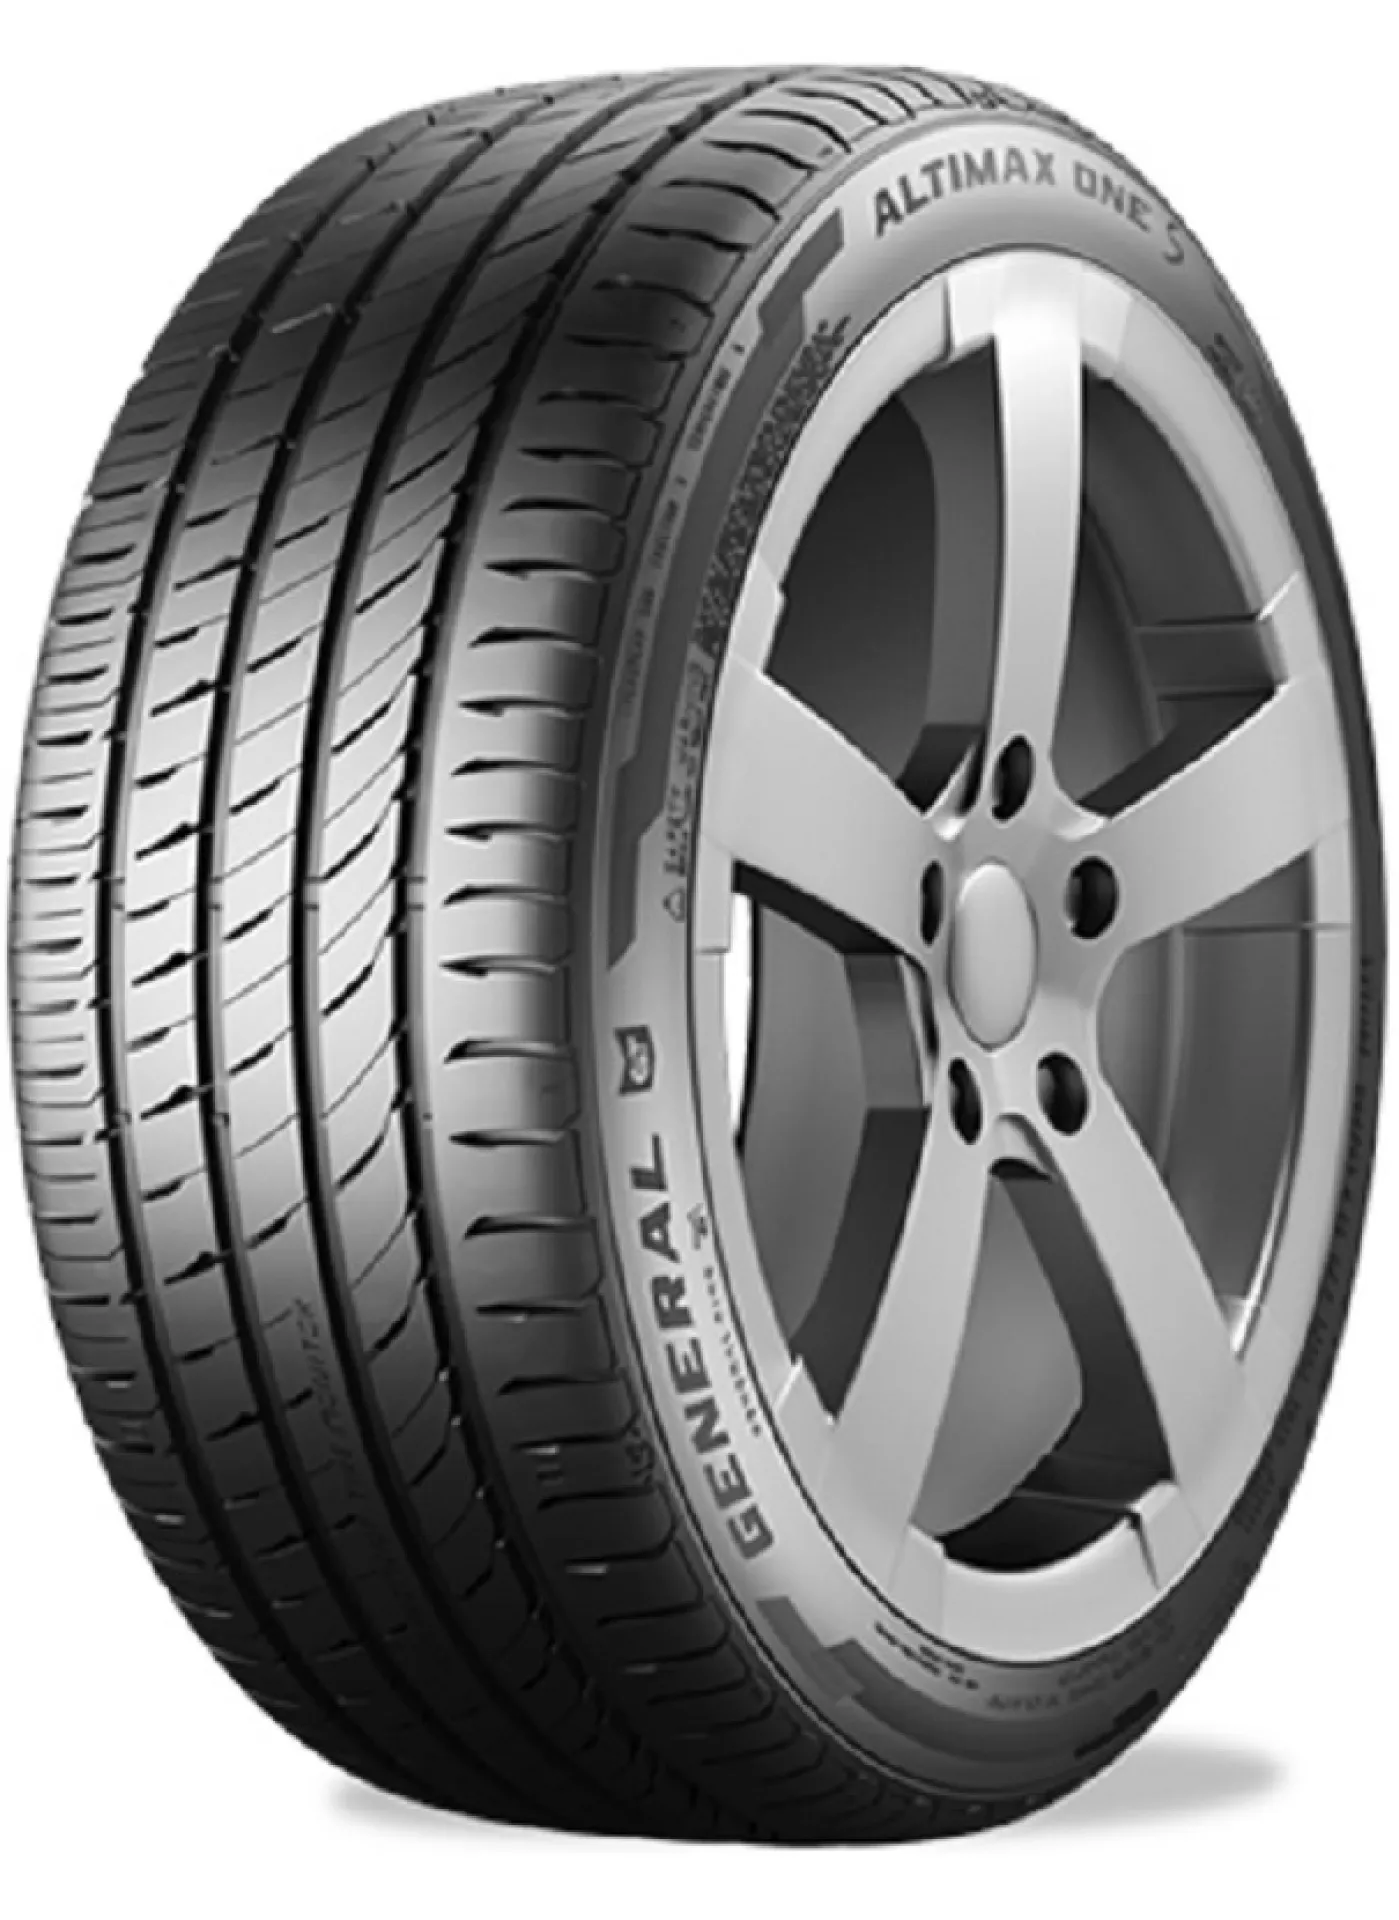 General Tire Altimax One S 195/55R20 95H TL XL